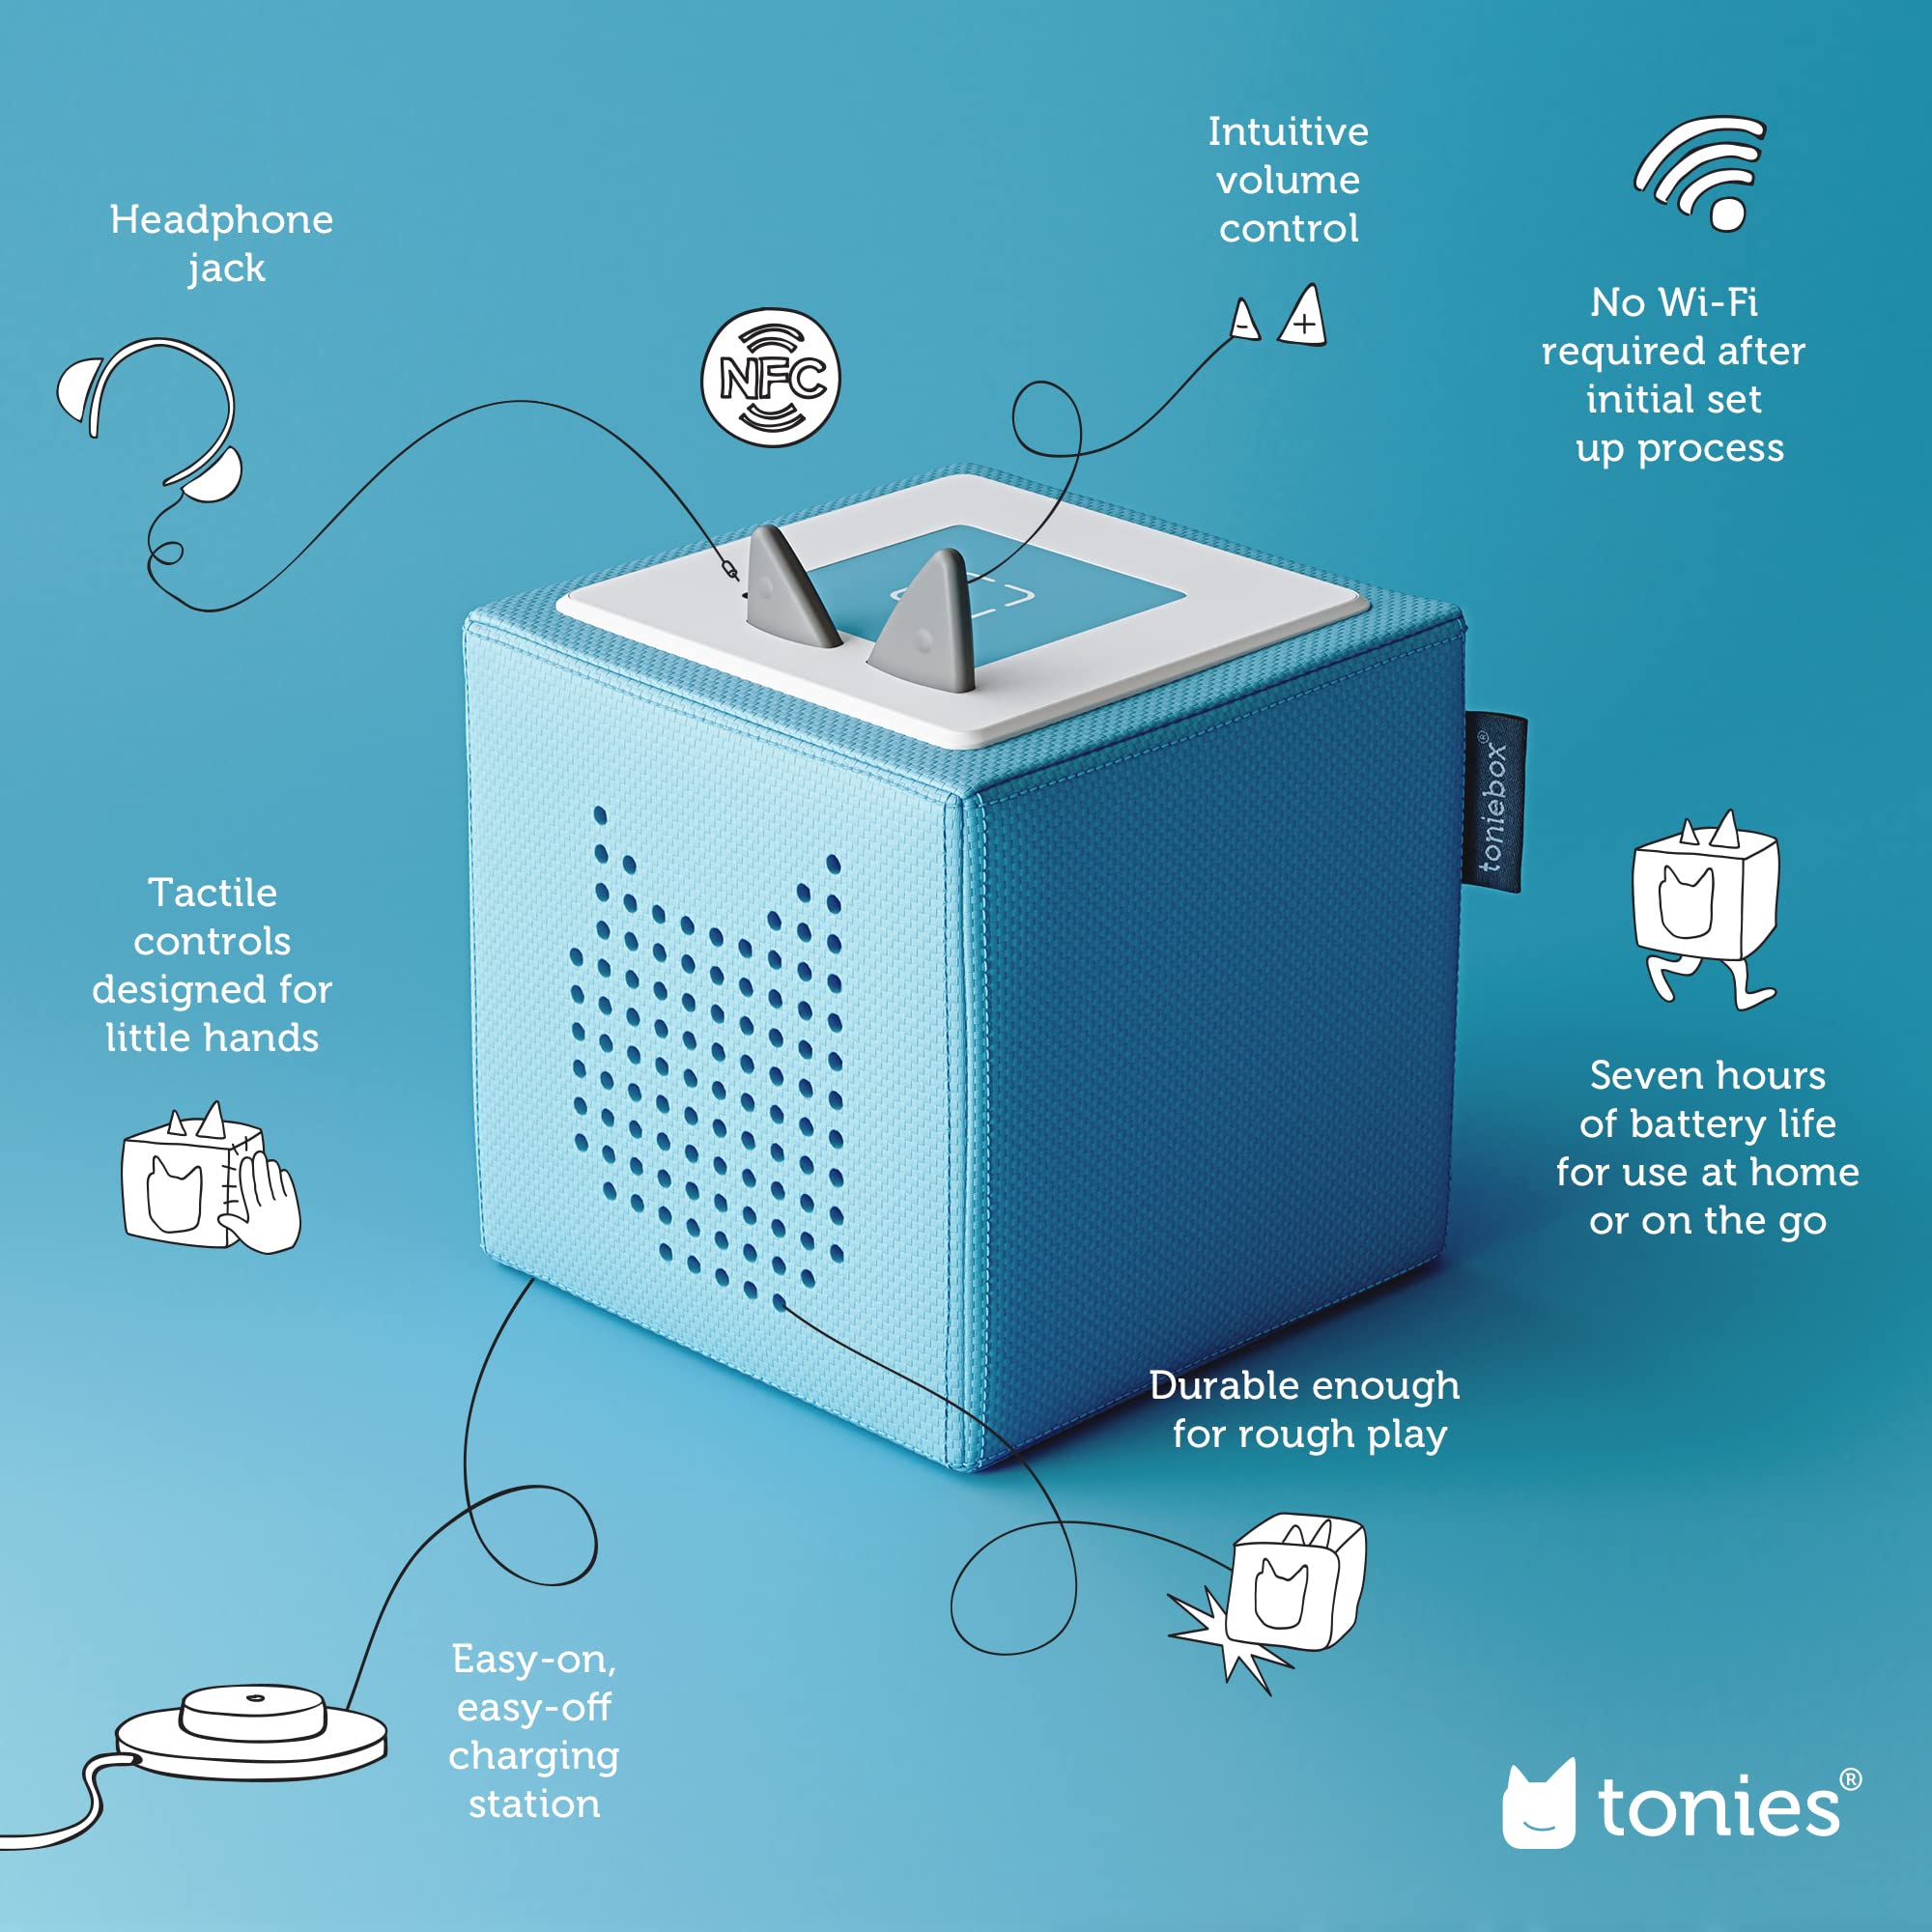 Toniebox Audio Player Starter Set with Chase, Skye, Marshall, and Playtime Puppy - Listen, Learn, and Play with One Huggable Little Box - Light Blue